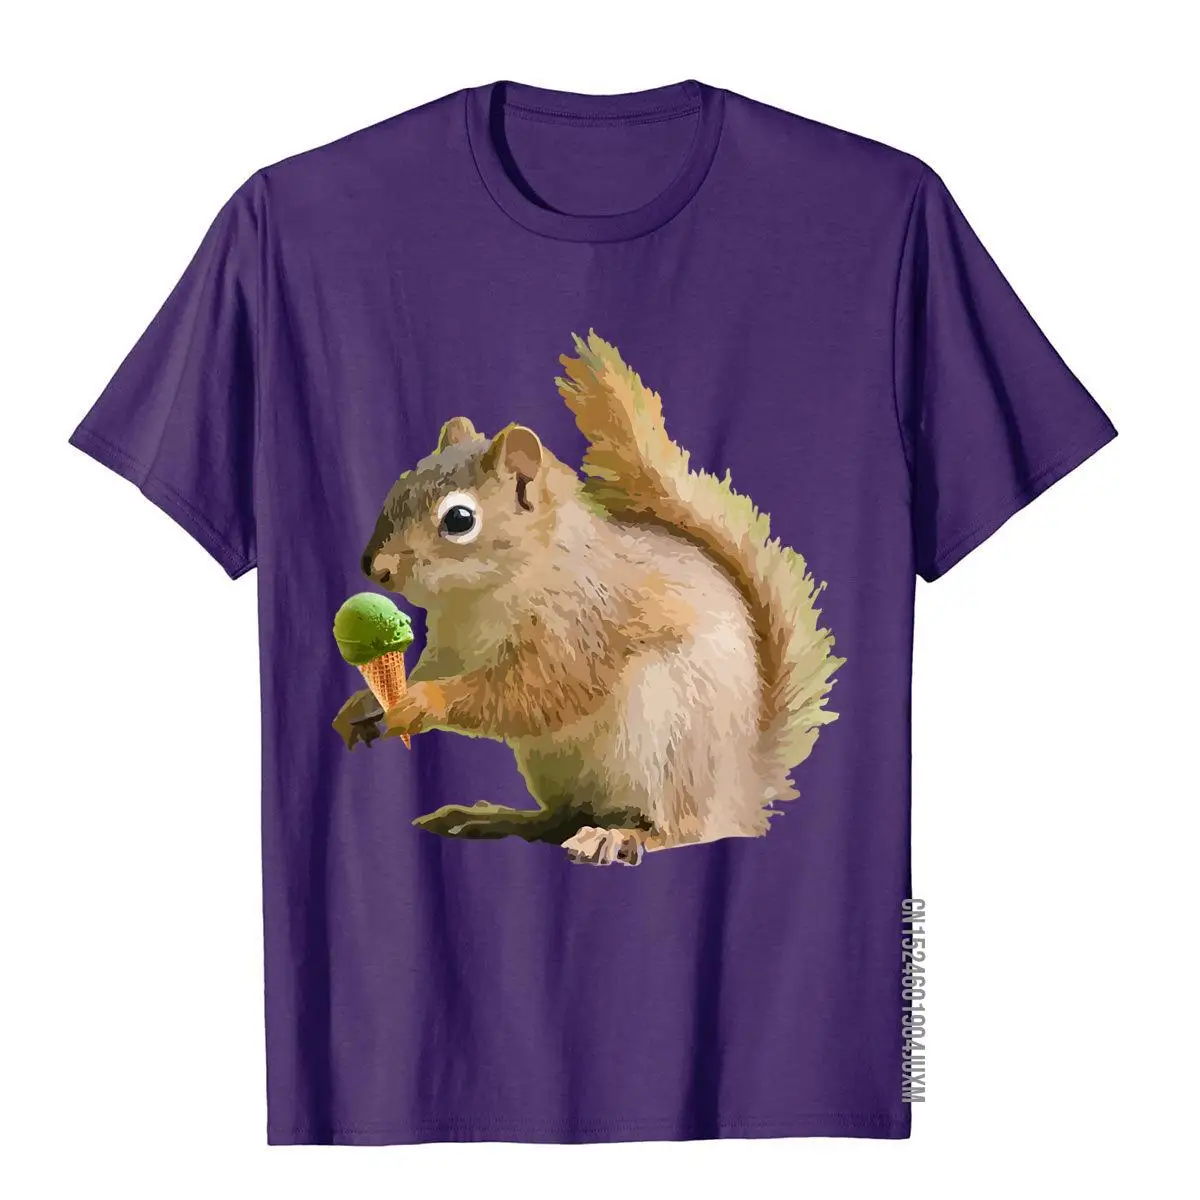 Mint Ice Cream Funny Squirrel T-Shirt Gift__97A147purple